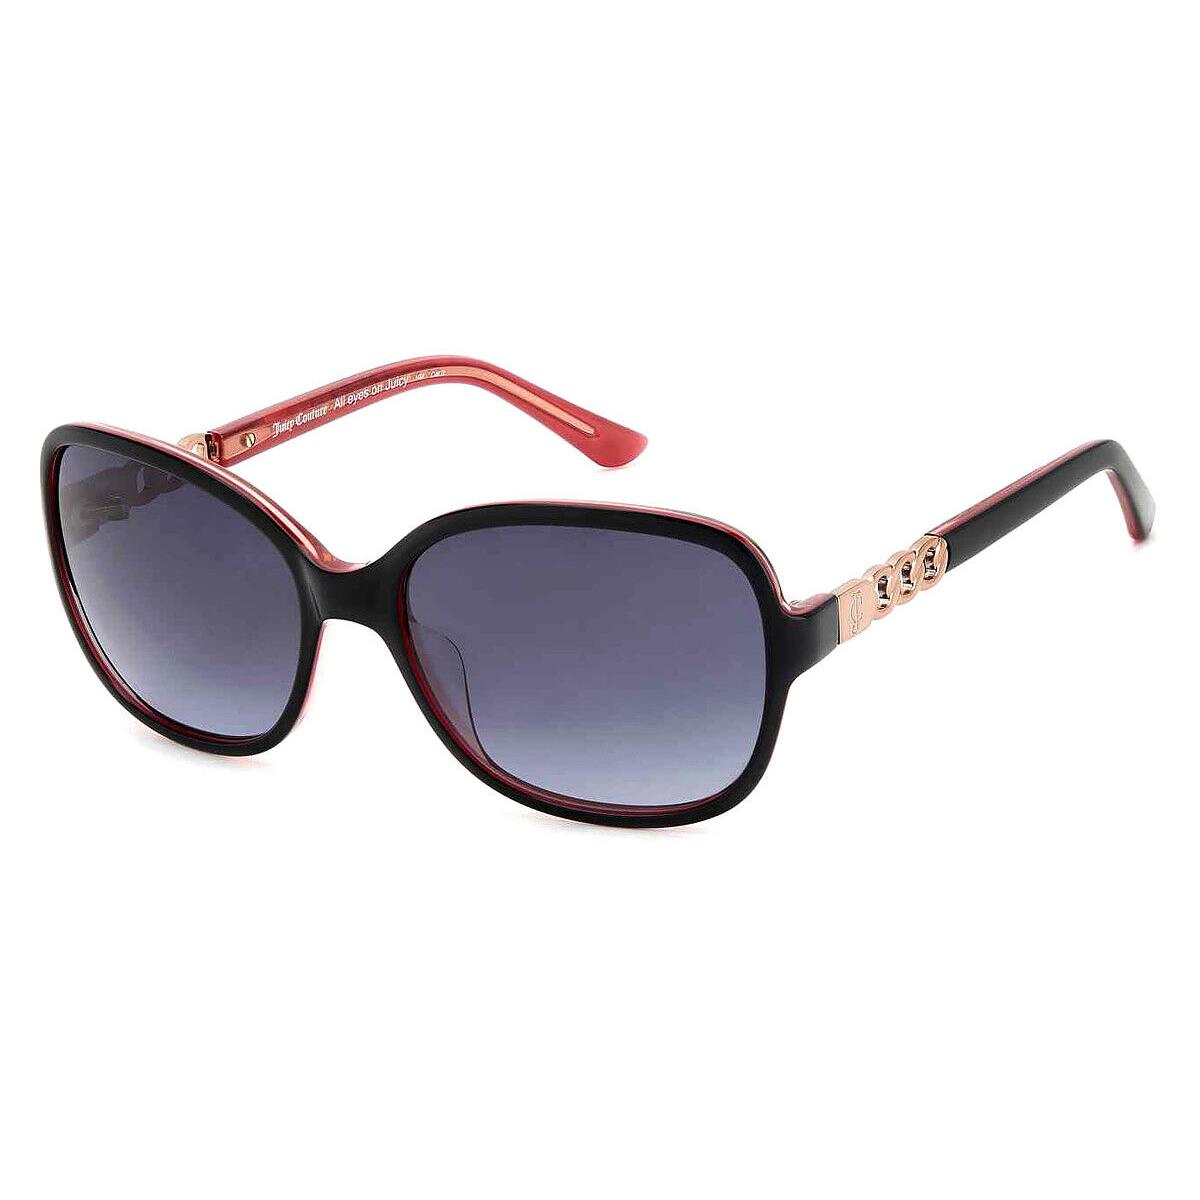 Juicy Couture Juc Sunglasses Women Black / Gray Shaded 57mm